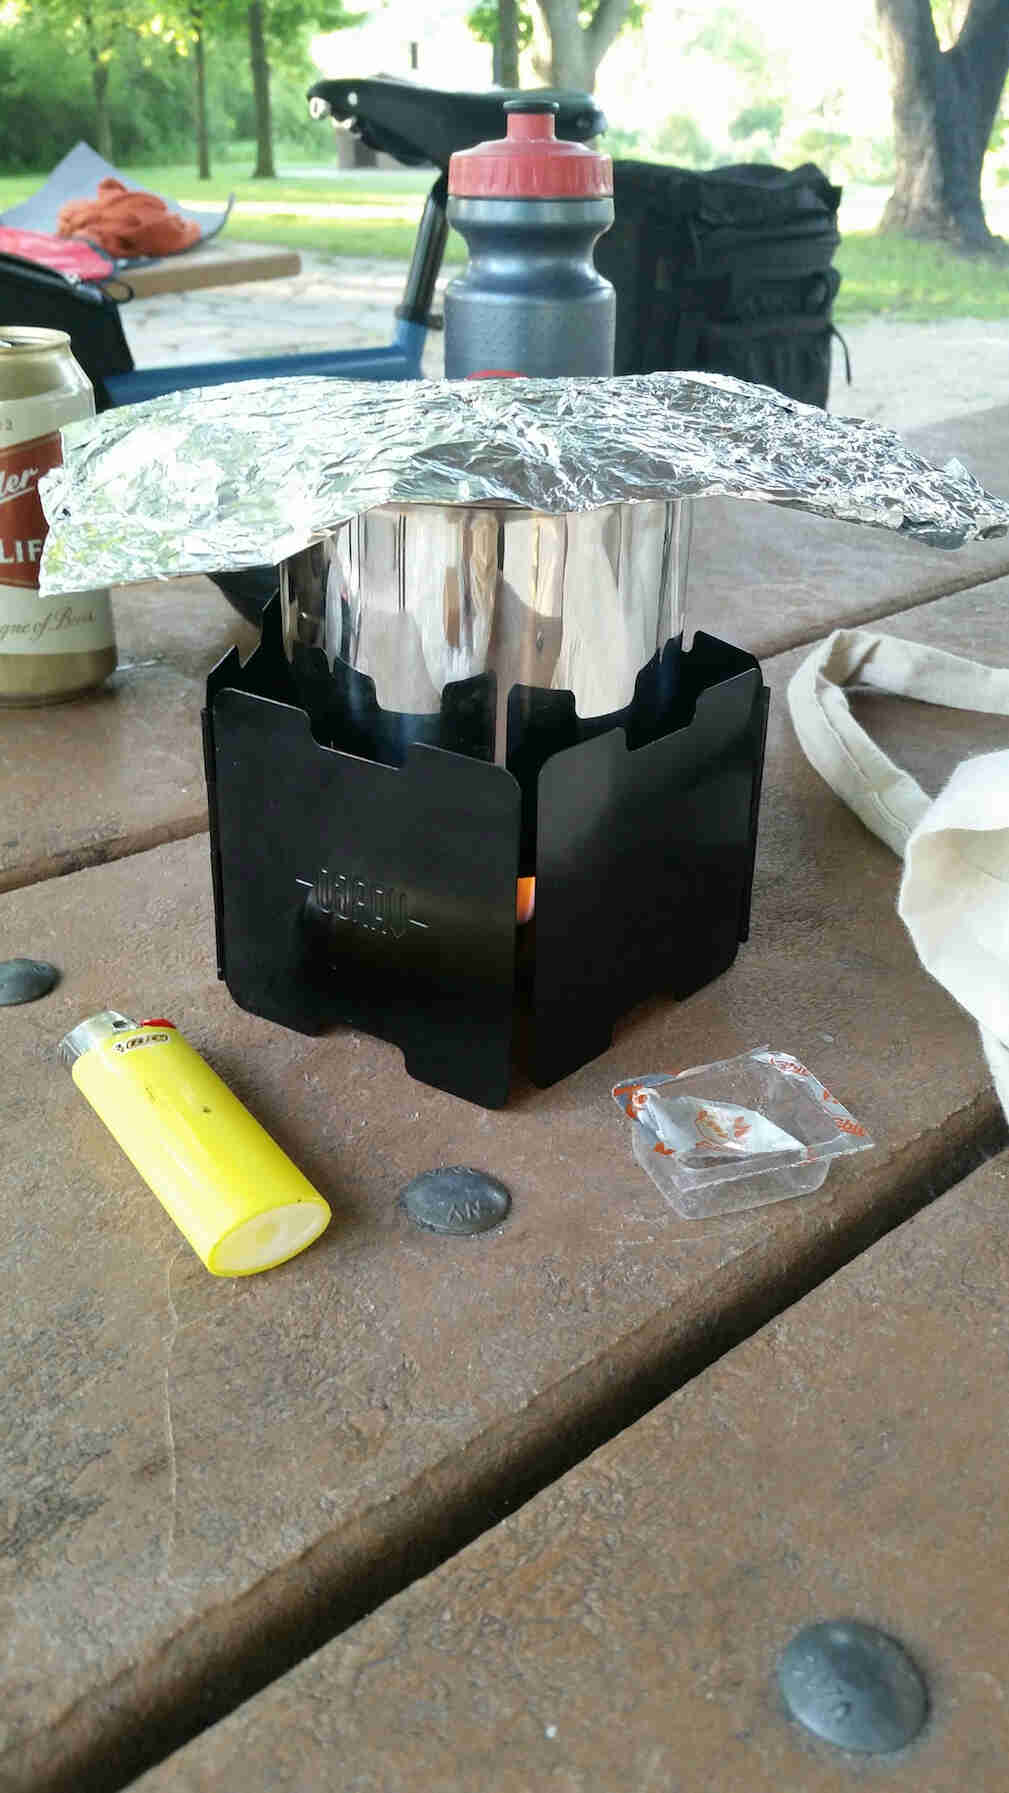 An Esbit table stove with next to a yellow Bic lighter, on top of a picnic table with a bike in the background